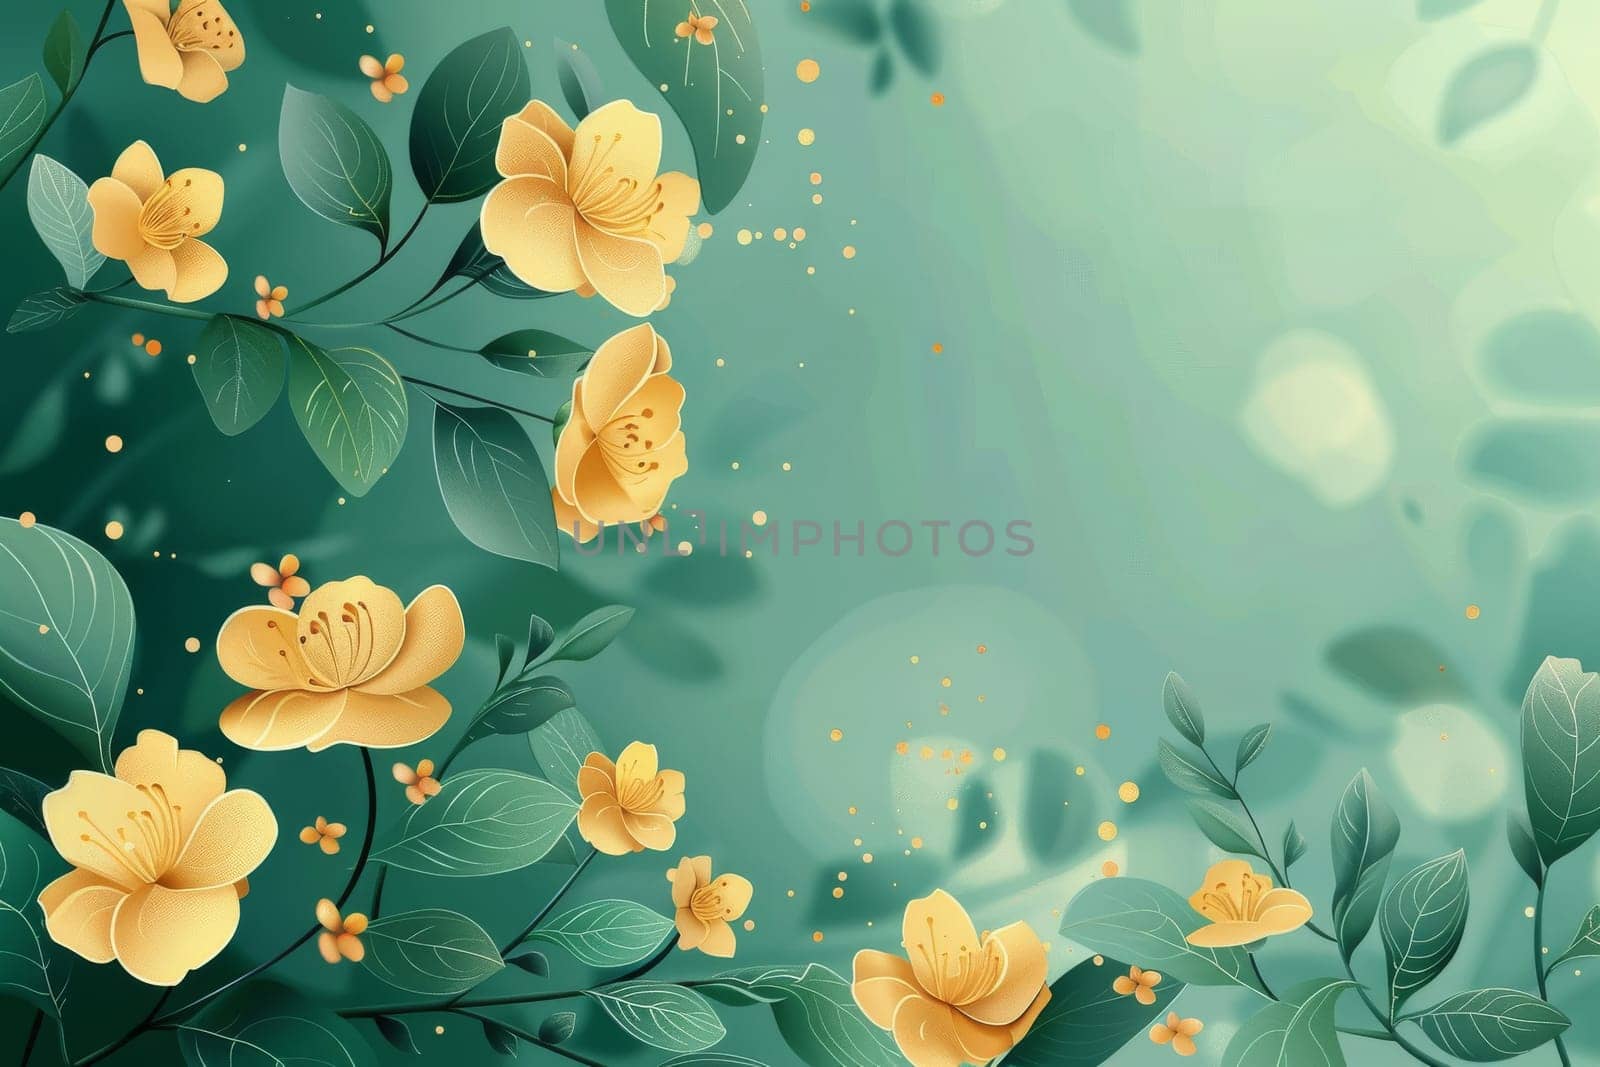 A gold and green flower with leaves is on a green background by itchaznong